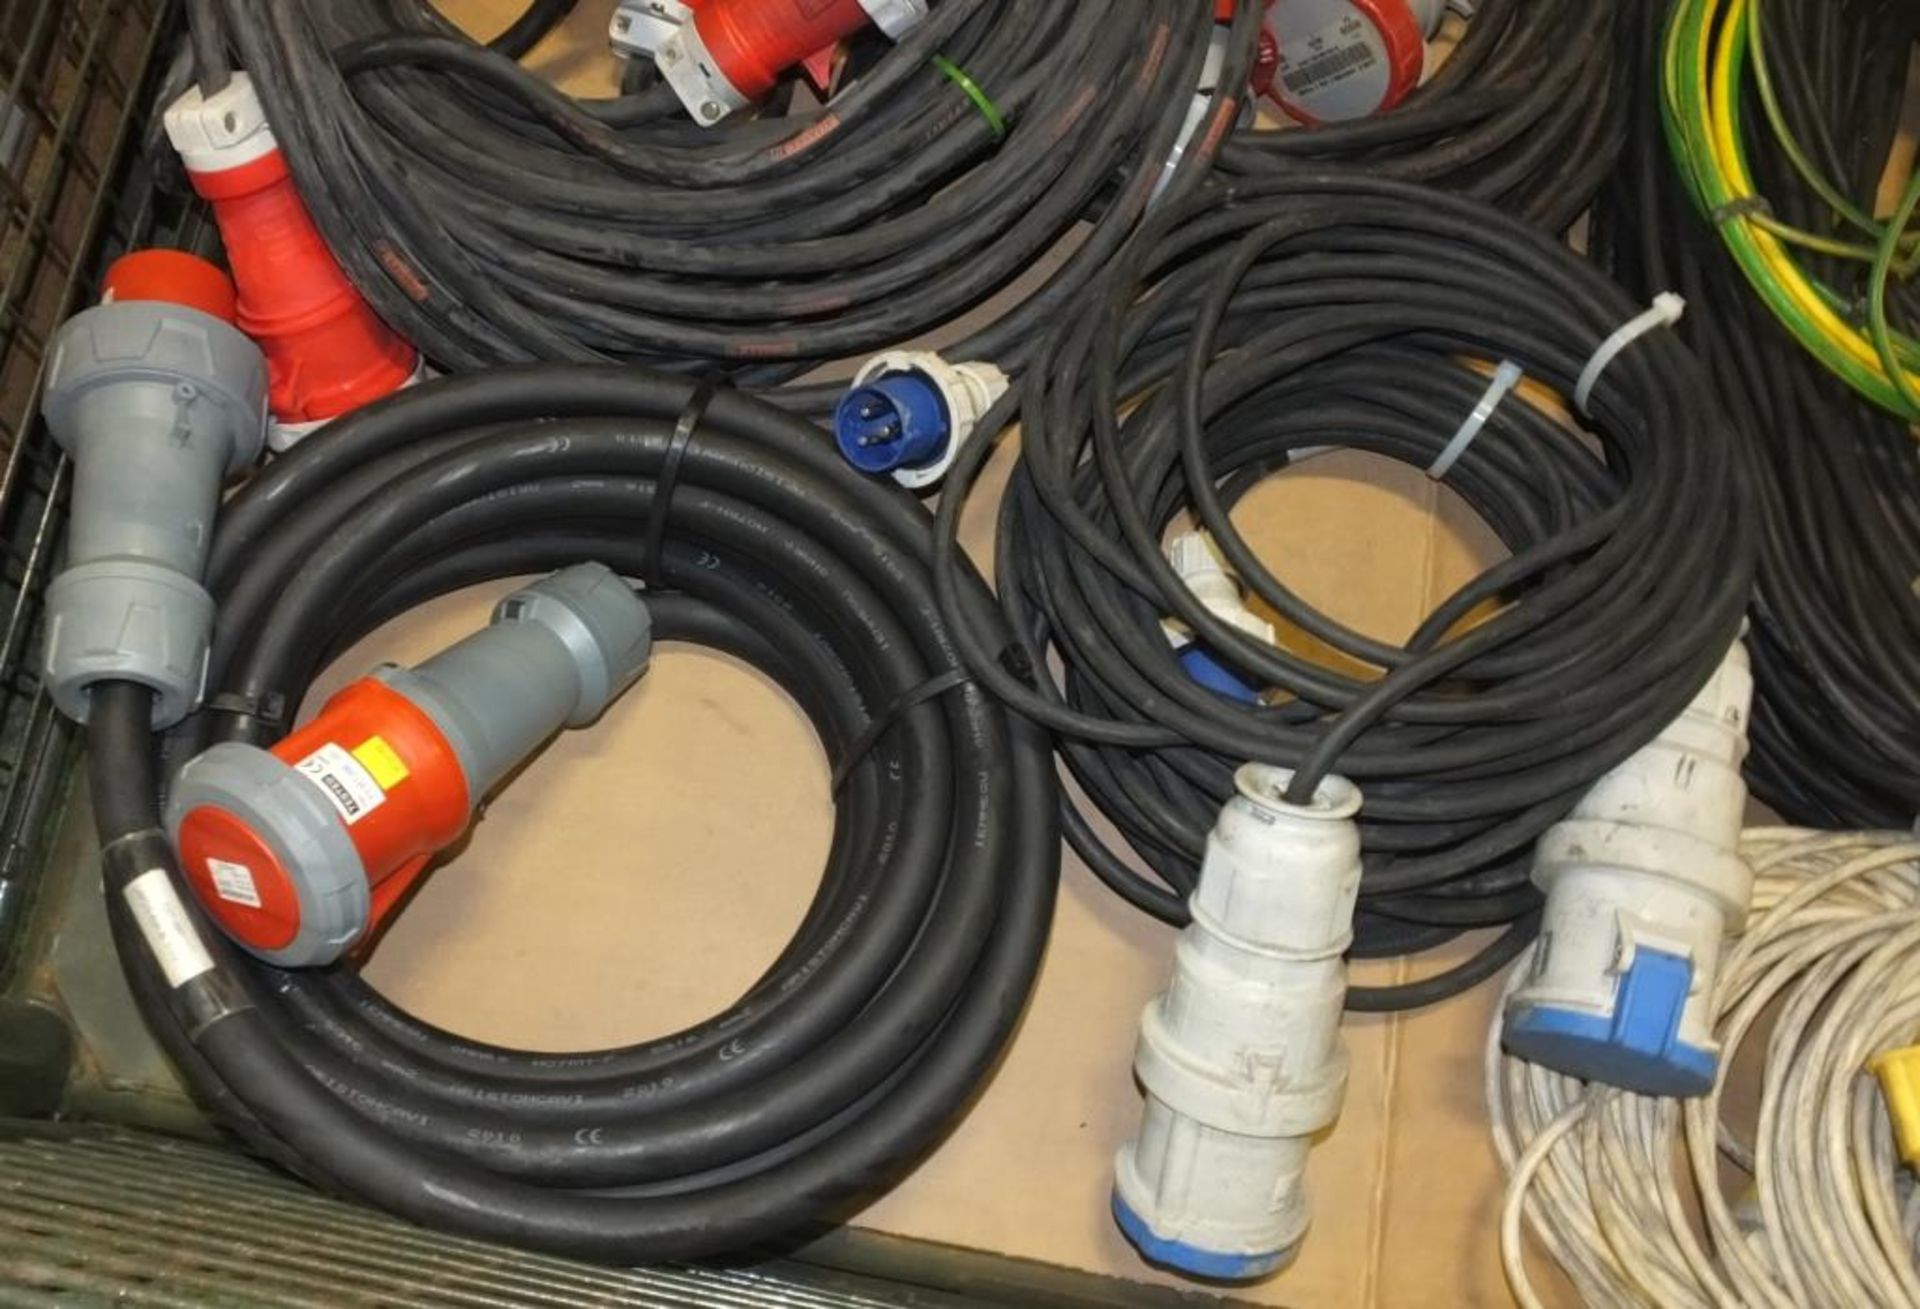 Various Electrical Extension Cable With IP Connectors, Electrical PM-6 Extension Cables - Image 5 of 5